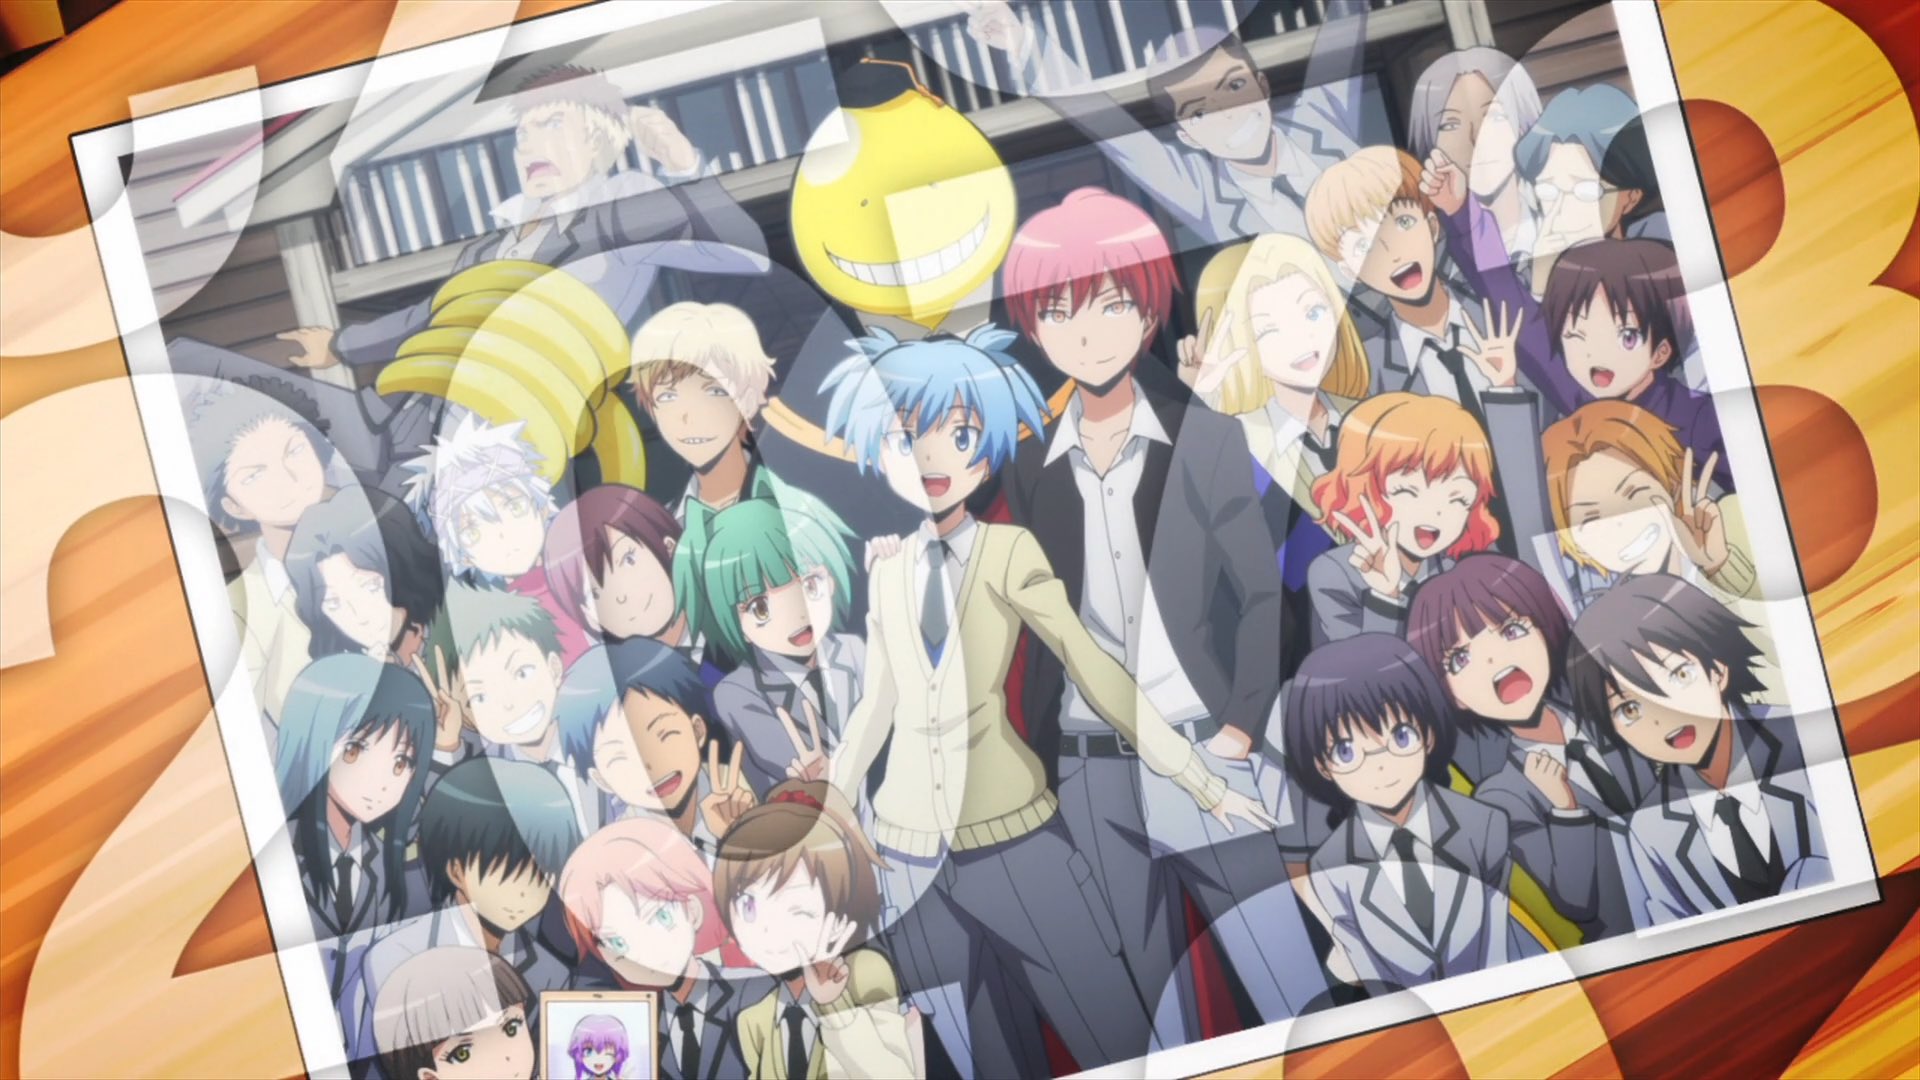 Assassination Classroom Celebrates 10th Anniversary With Special Art